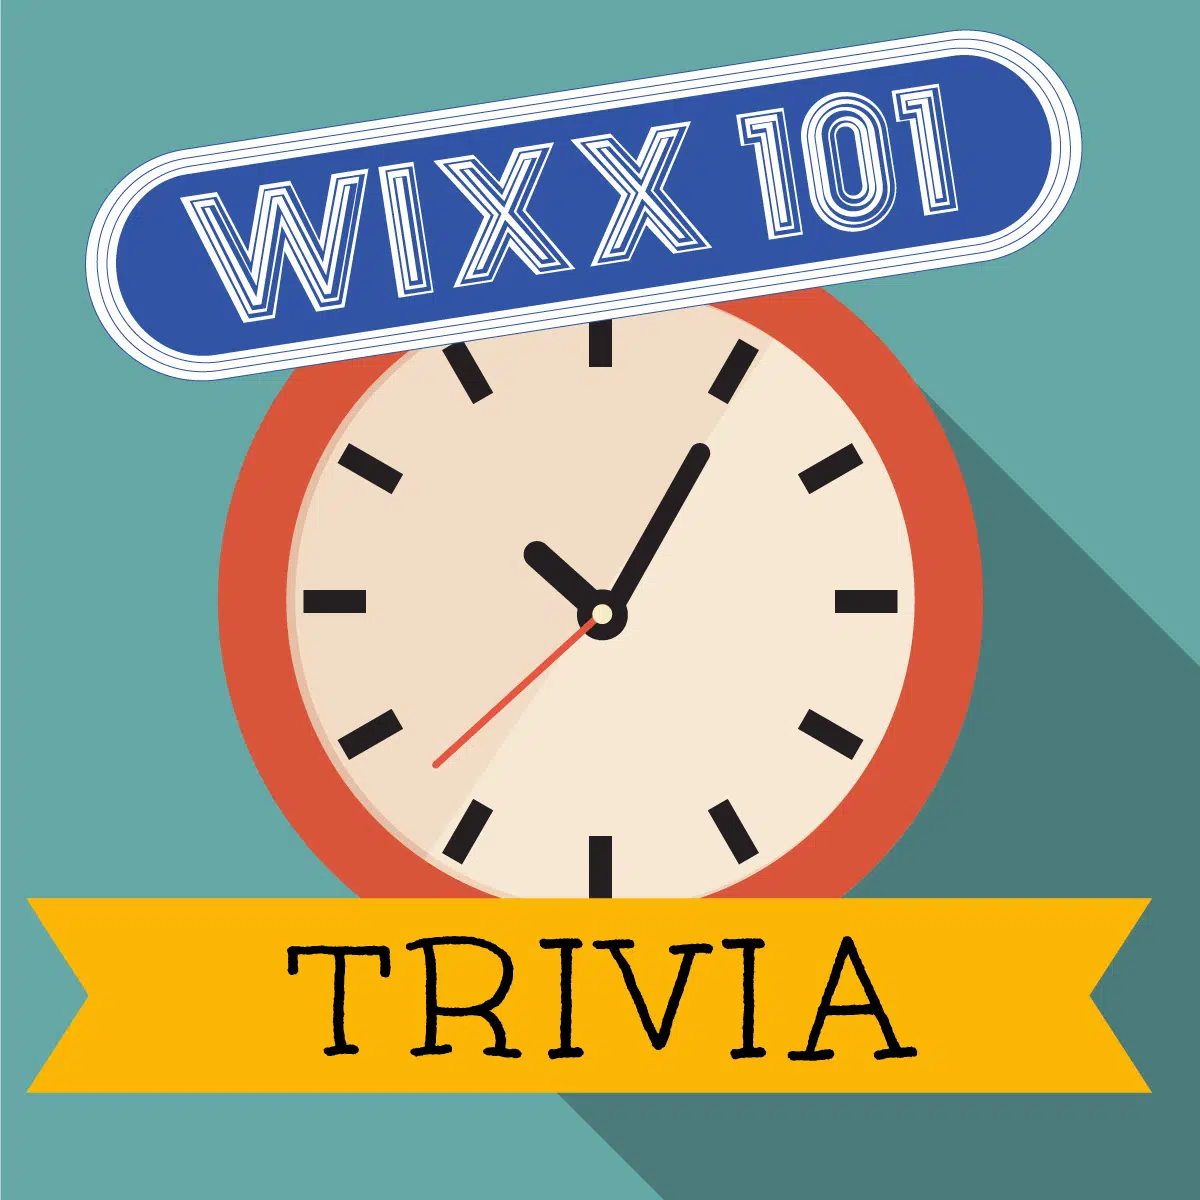 10 O Clock Trivia Answers April 21 101 Wixx Your Hit Music Station